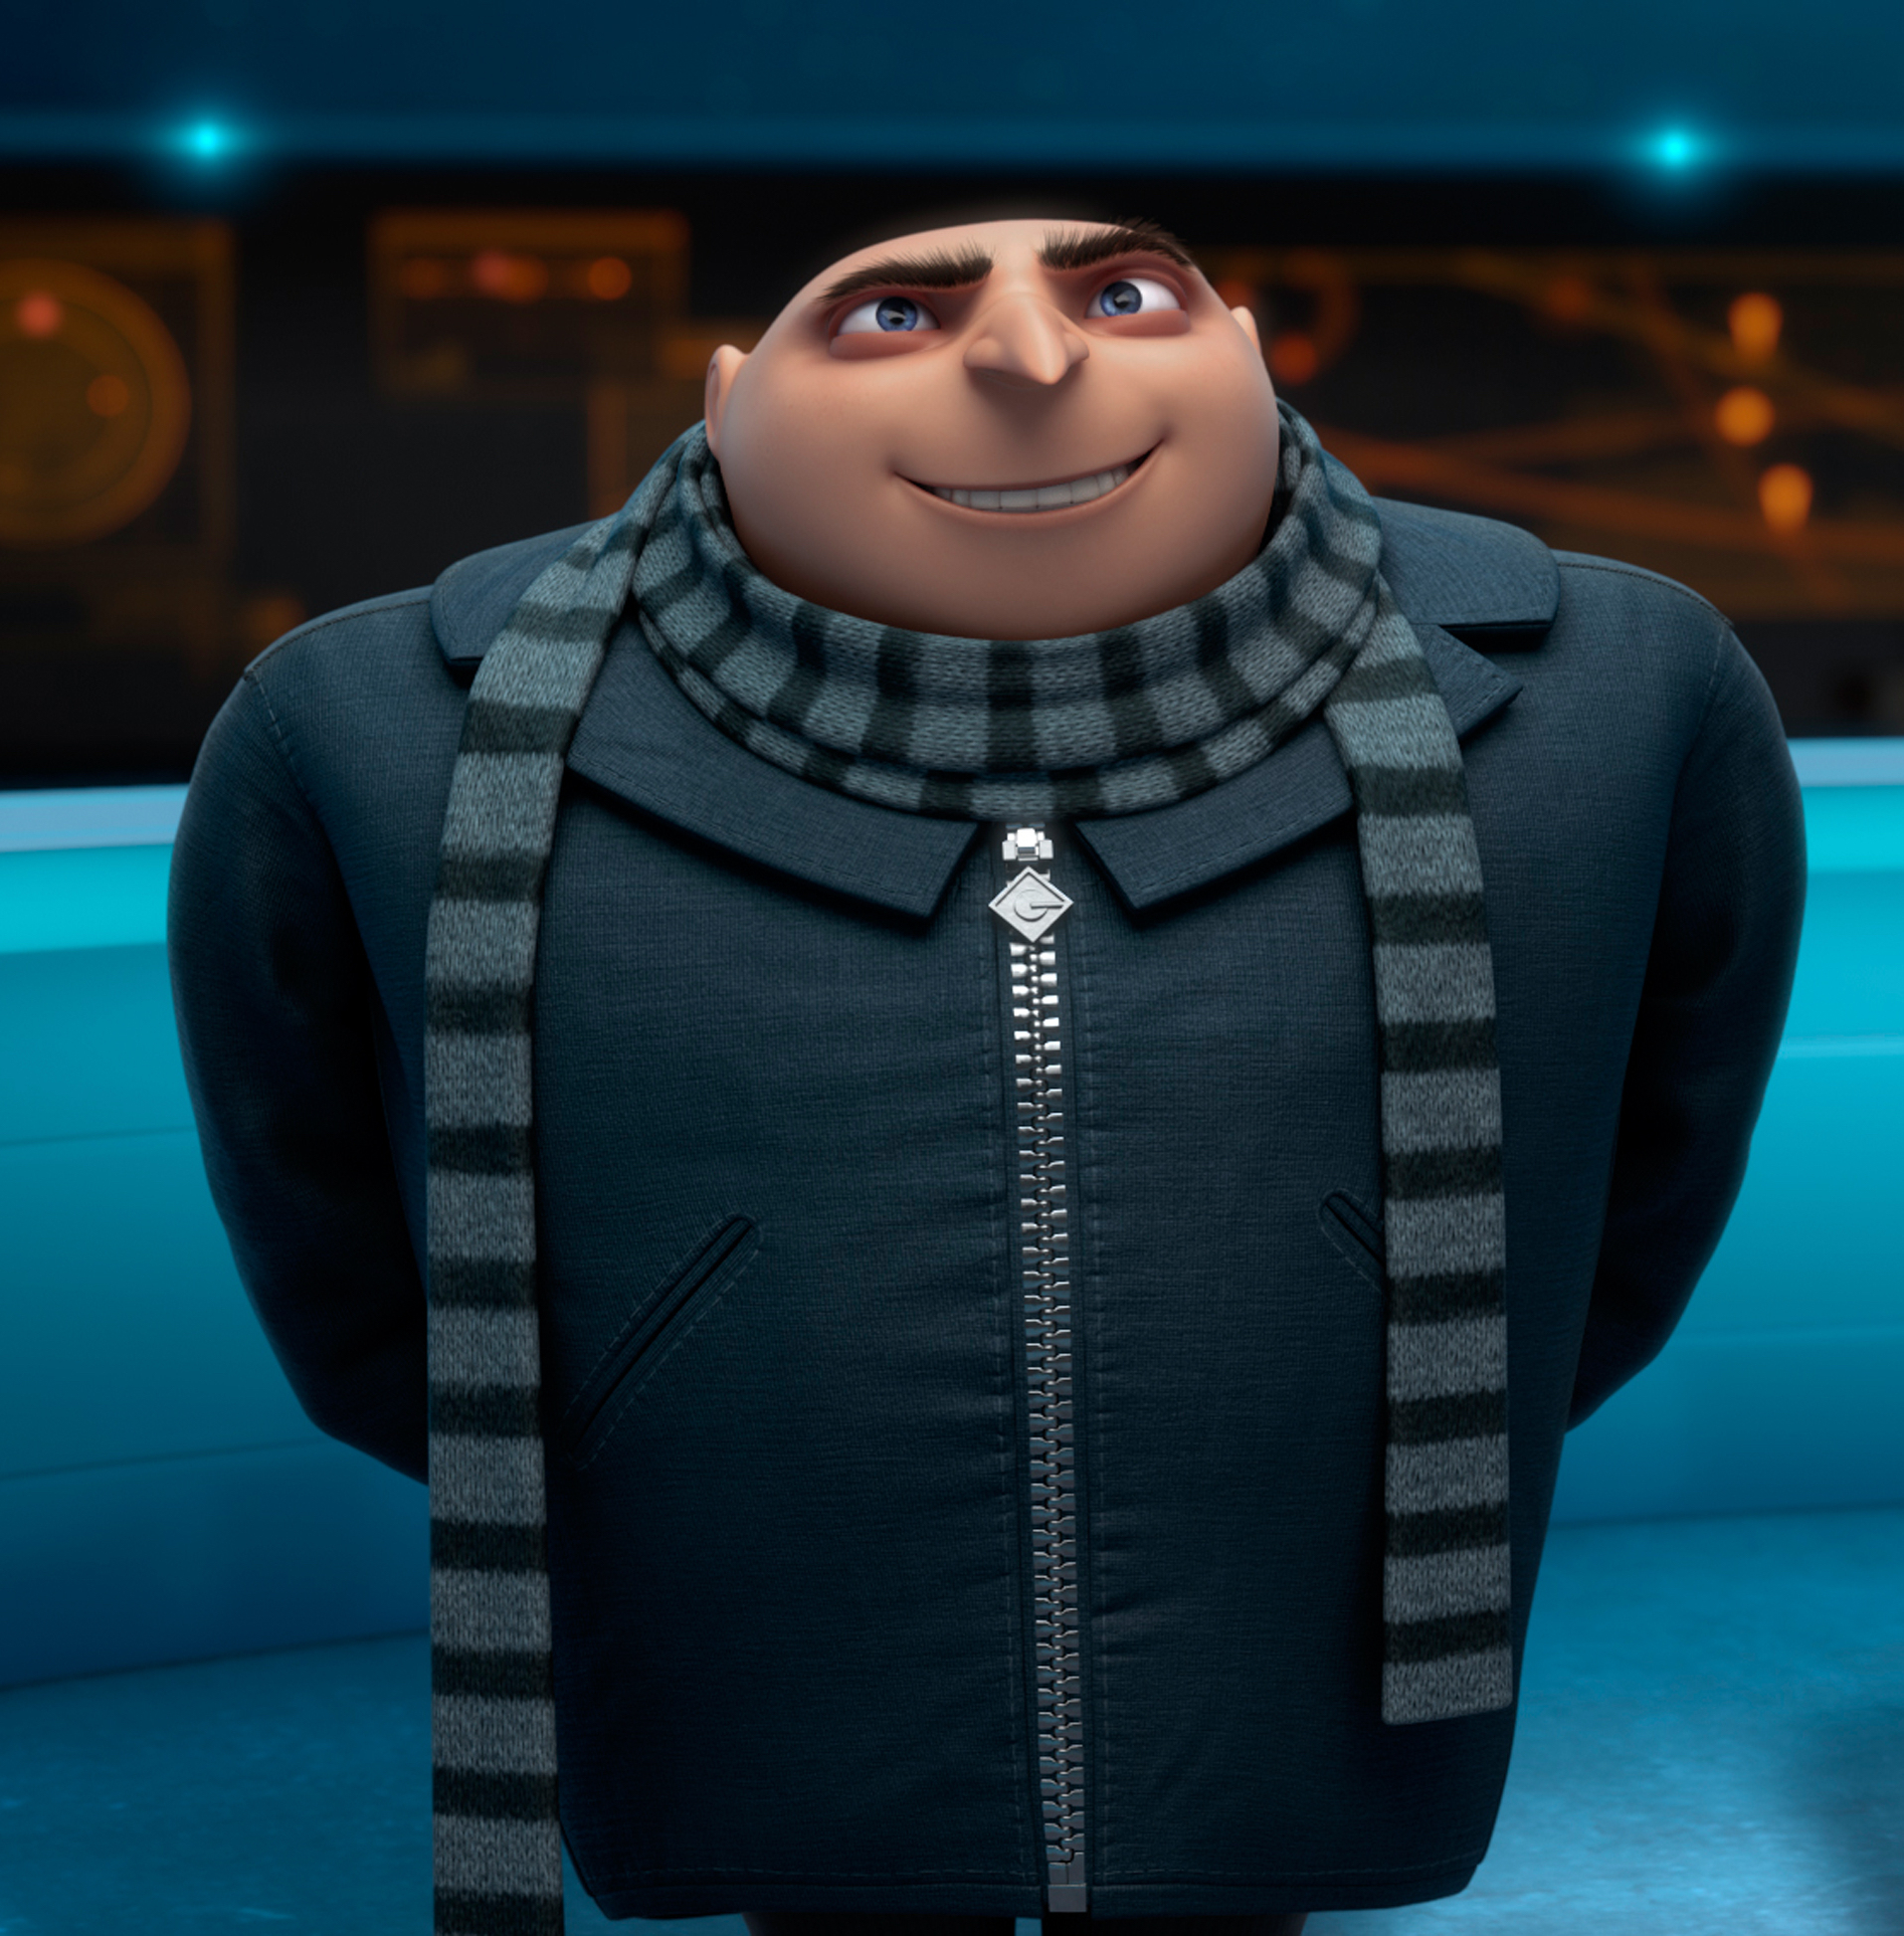 The best laid plans of Gru and others always go awry. Always.